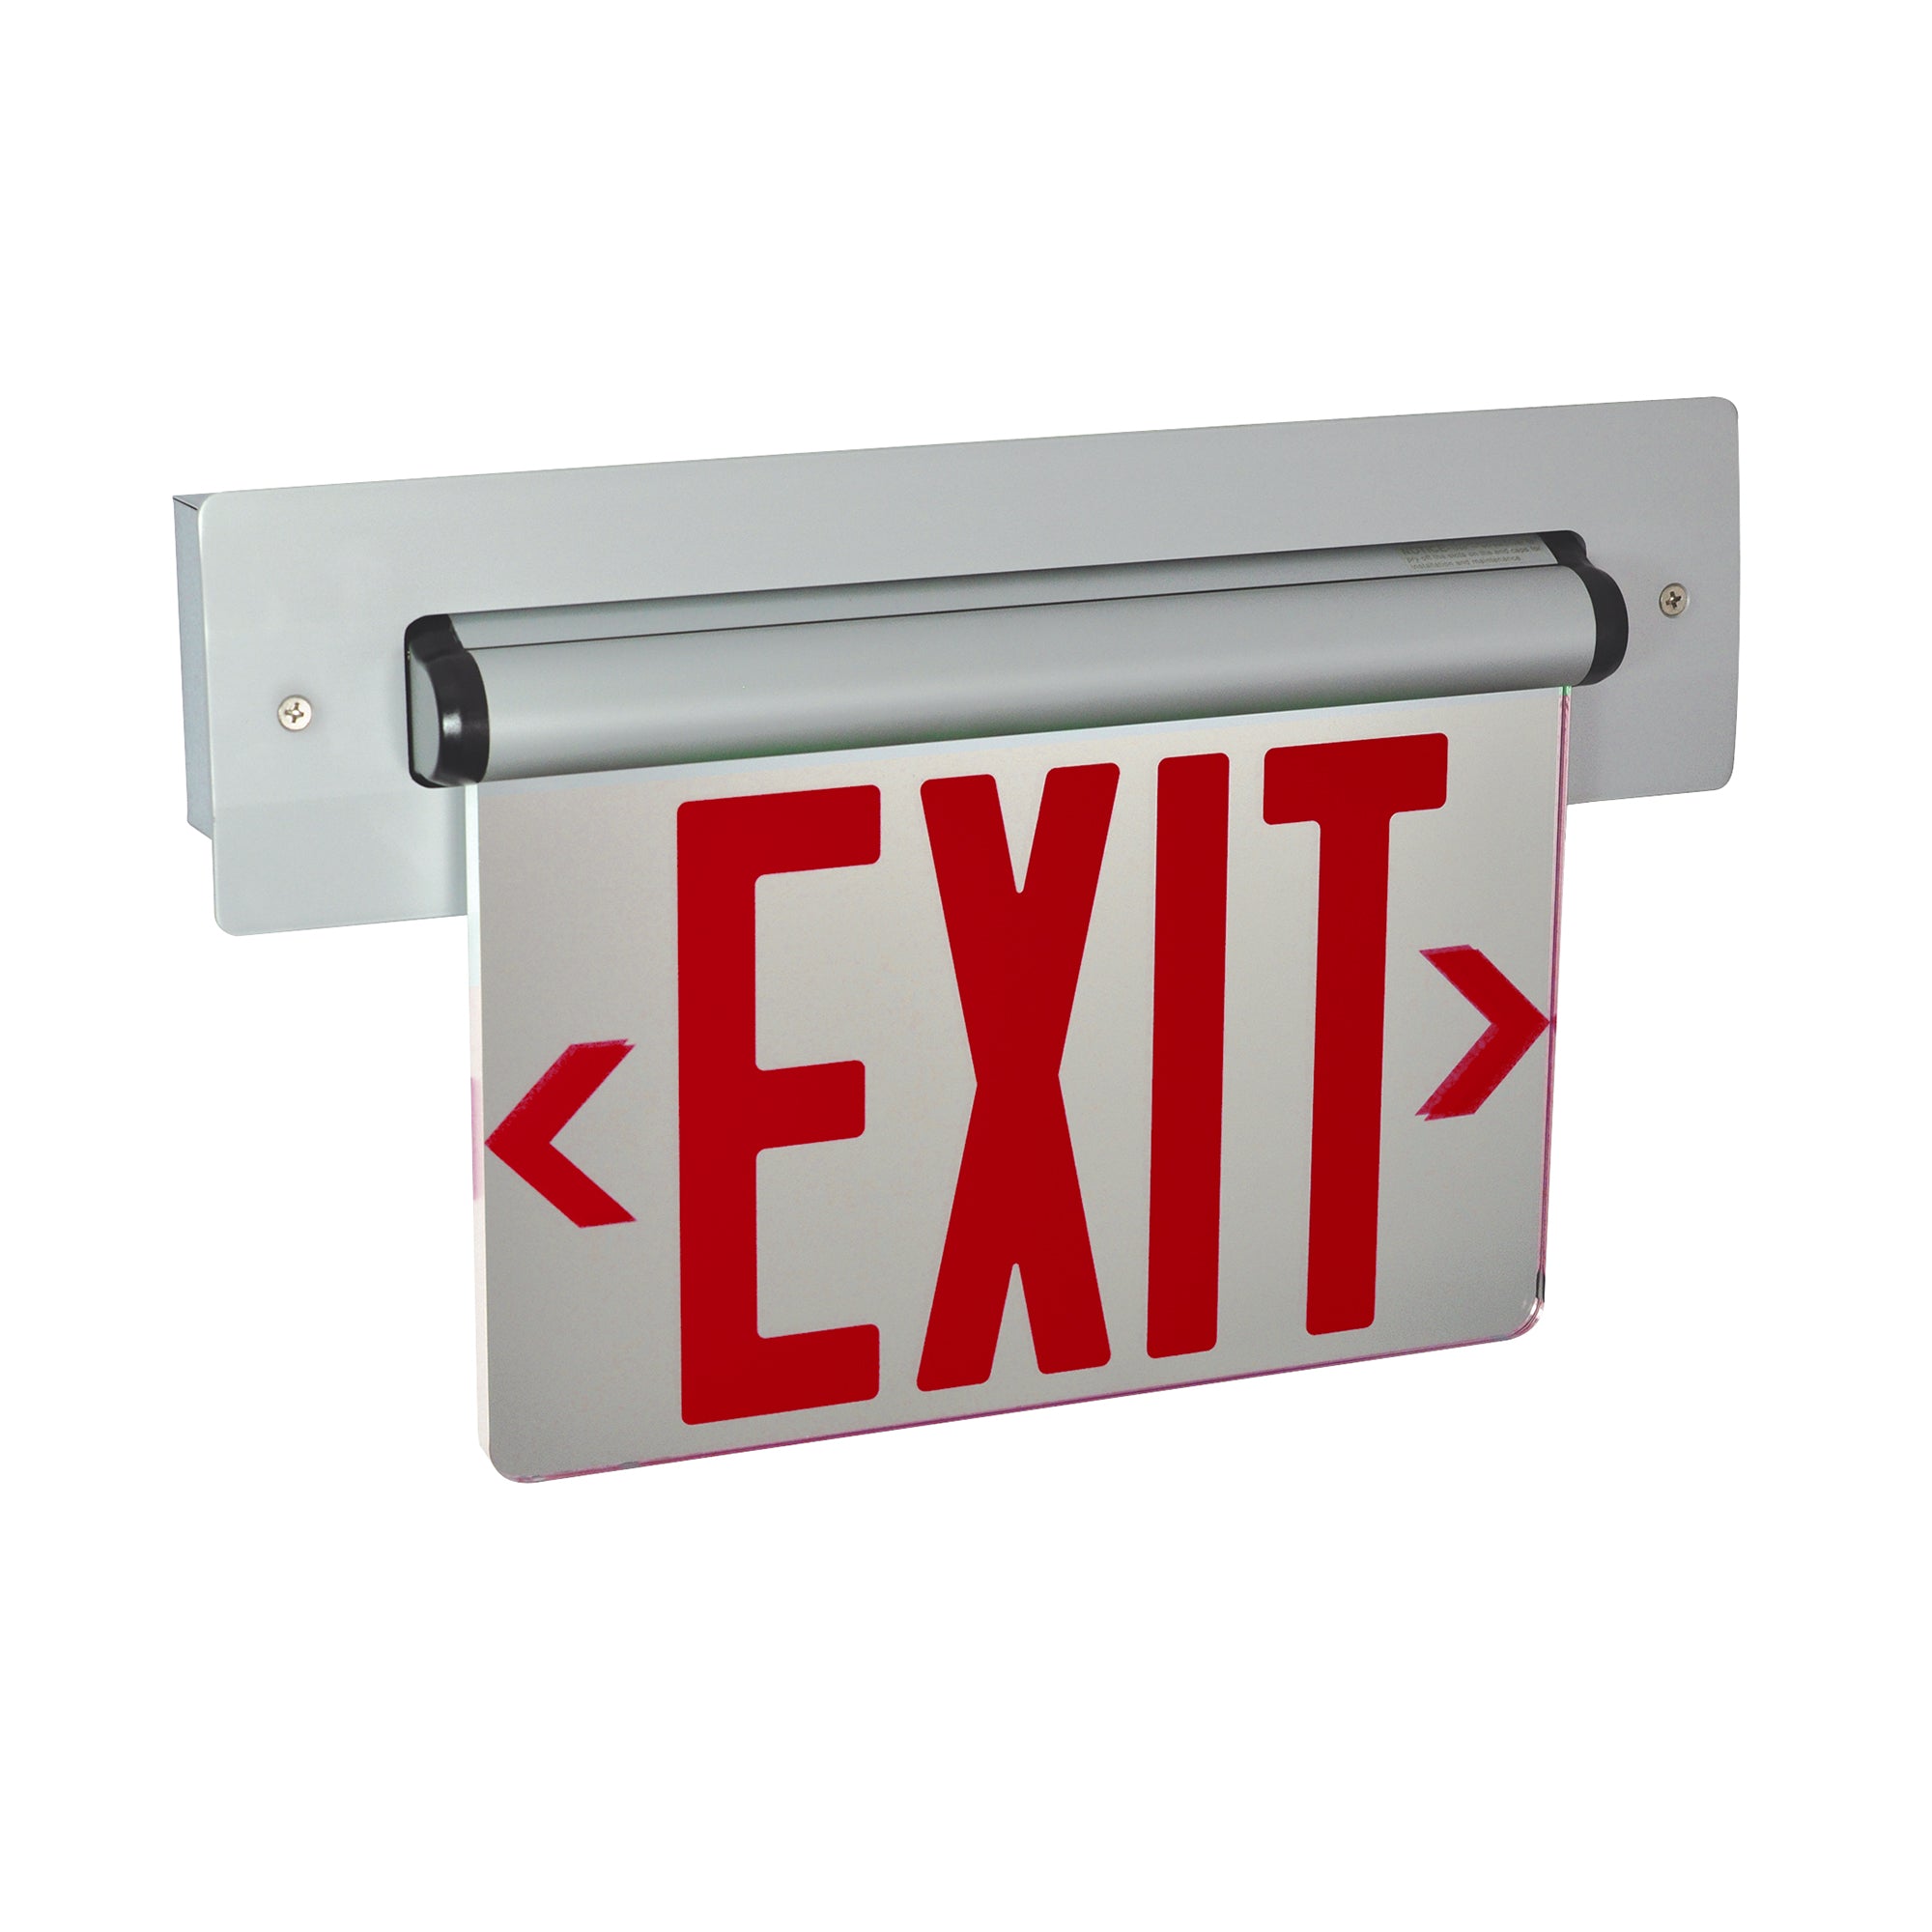 Nora Lighting NX-813-LEDRMA - Exit / Emergency - Recessed Adjustable LED Edge-Lit Exit Sign, AC Only, 6 Inch Red Letters, Single Face / Mirrored Acrylic, Aluminum Housing